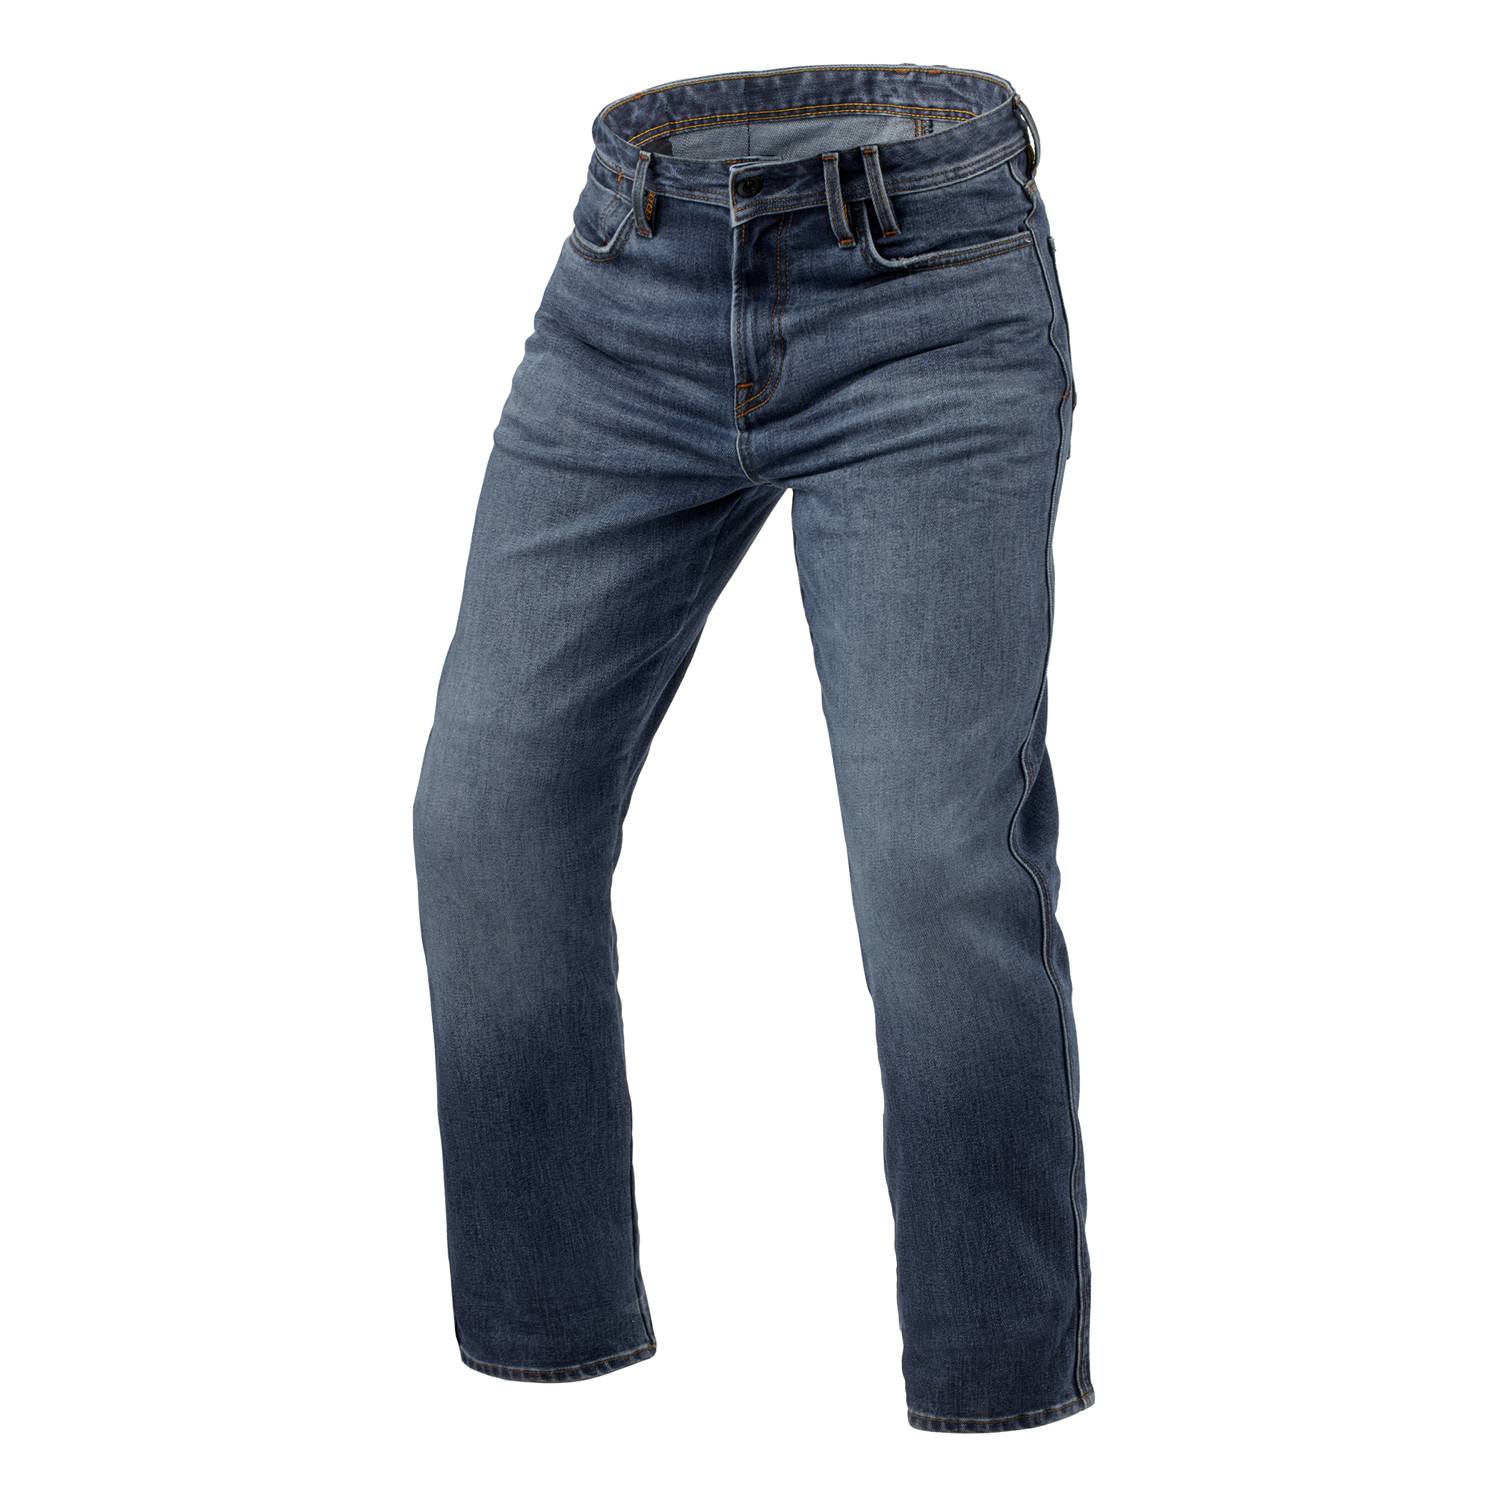 Image of REV'IT! Jeans Lombard 3 RF Medium Blue Stone L34 Motorcycle Jeans Taille L34/W32